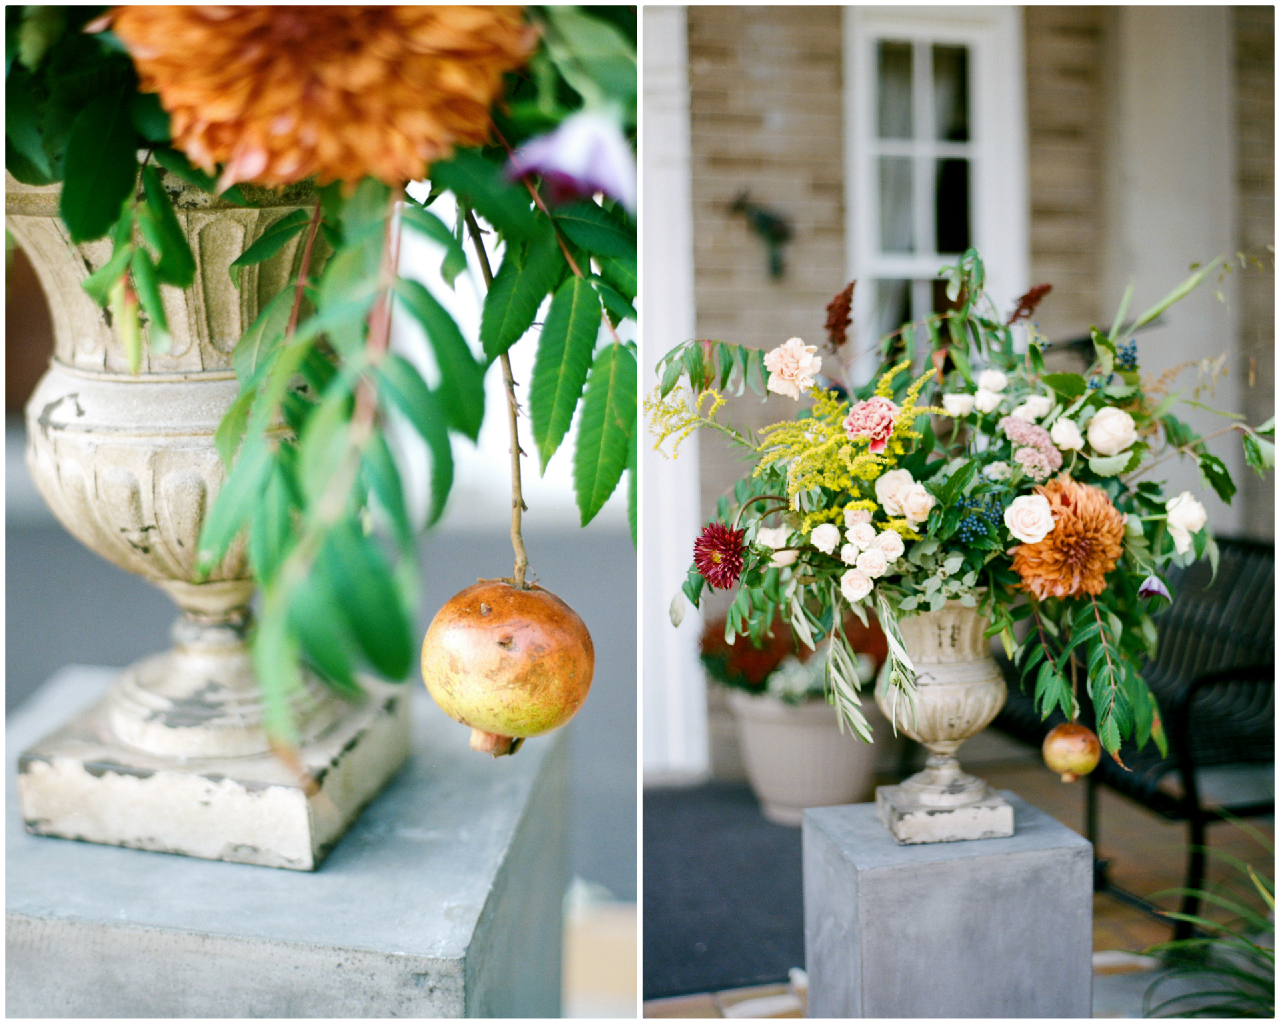 Foodie Wedding Ideas | The Day's Design | Cory Weber Photography